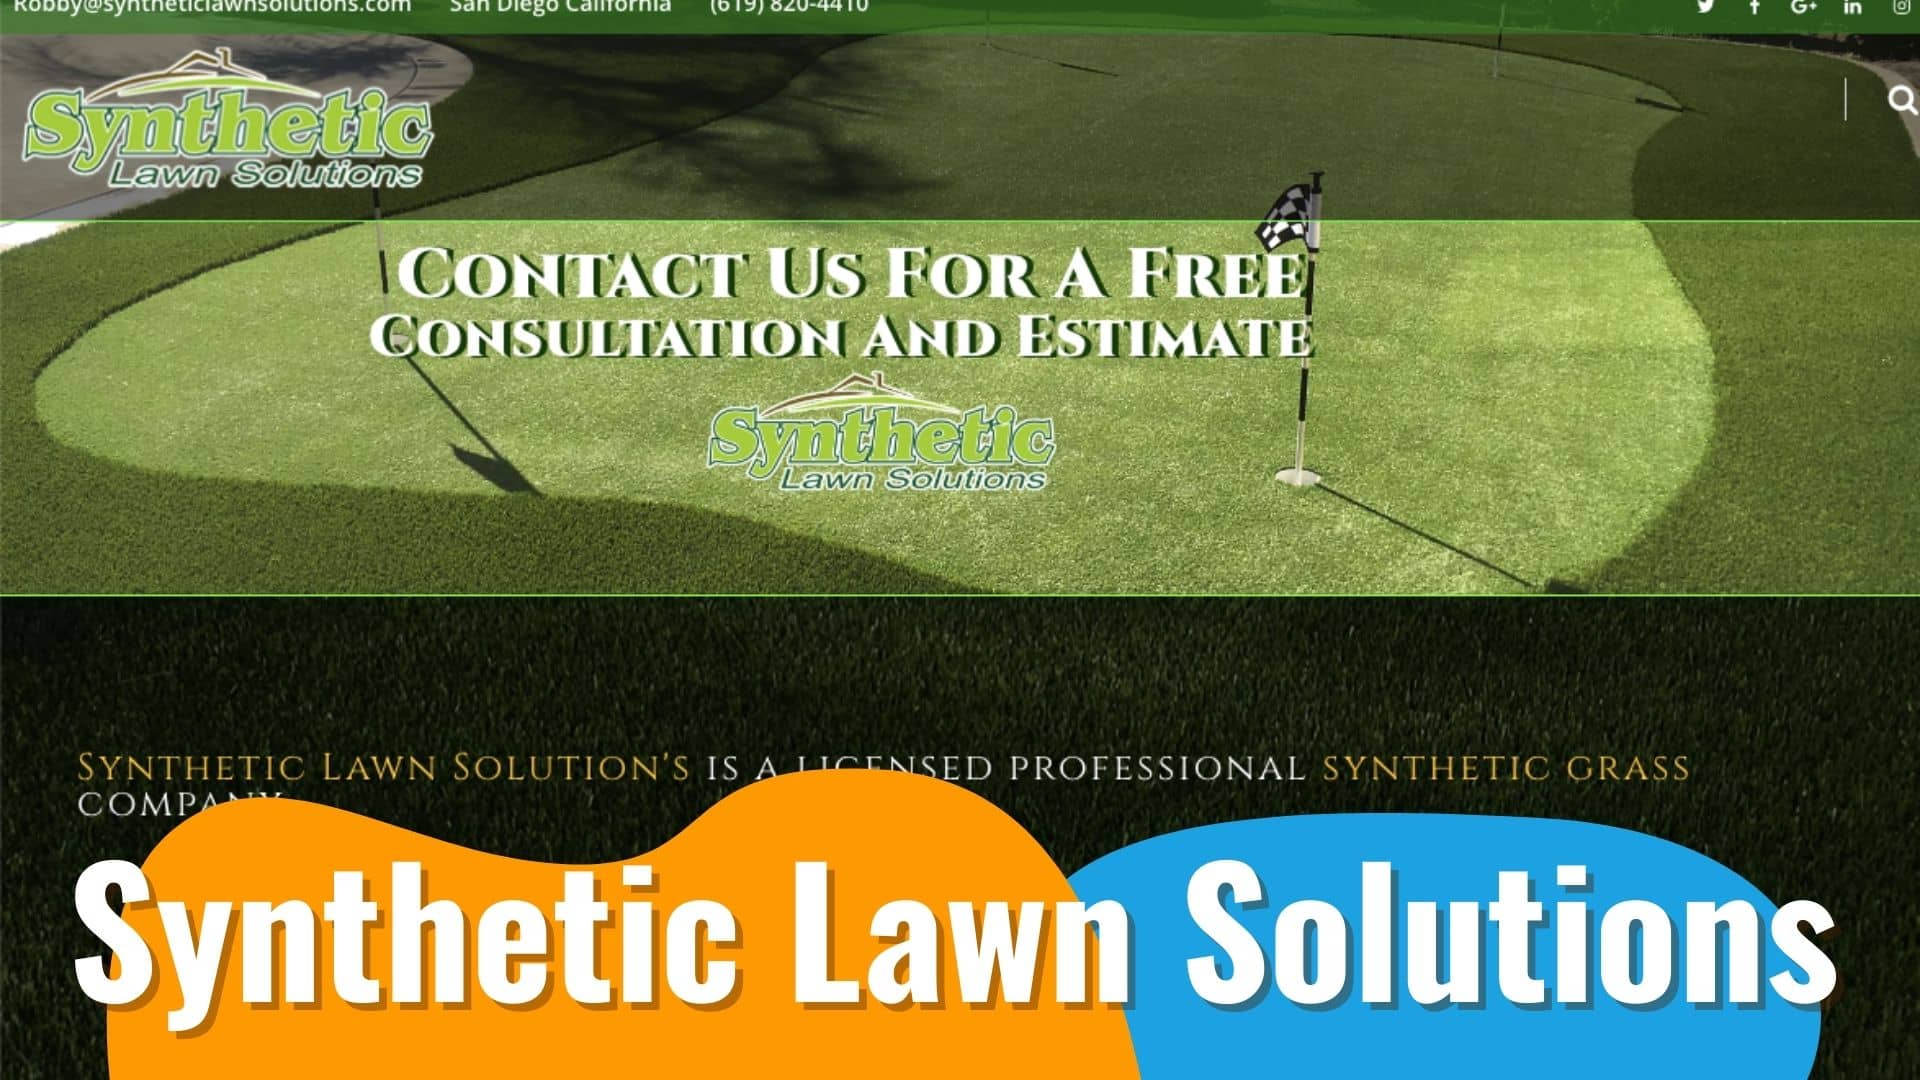 Synthetic Lawn Solutions San Diego